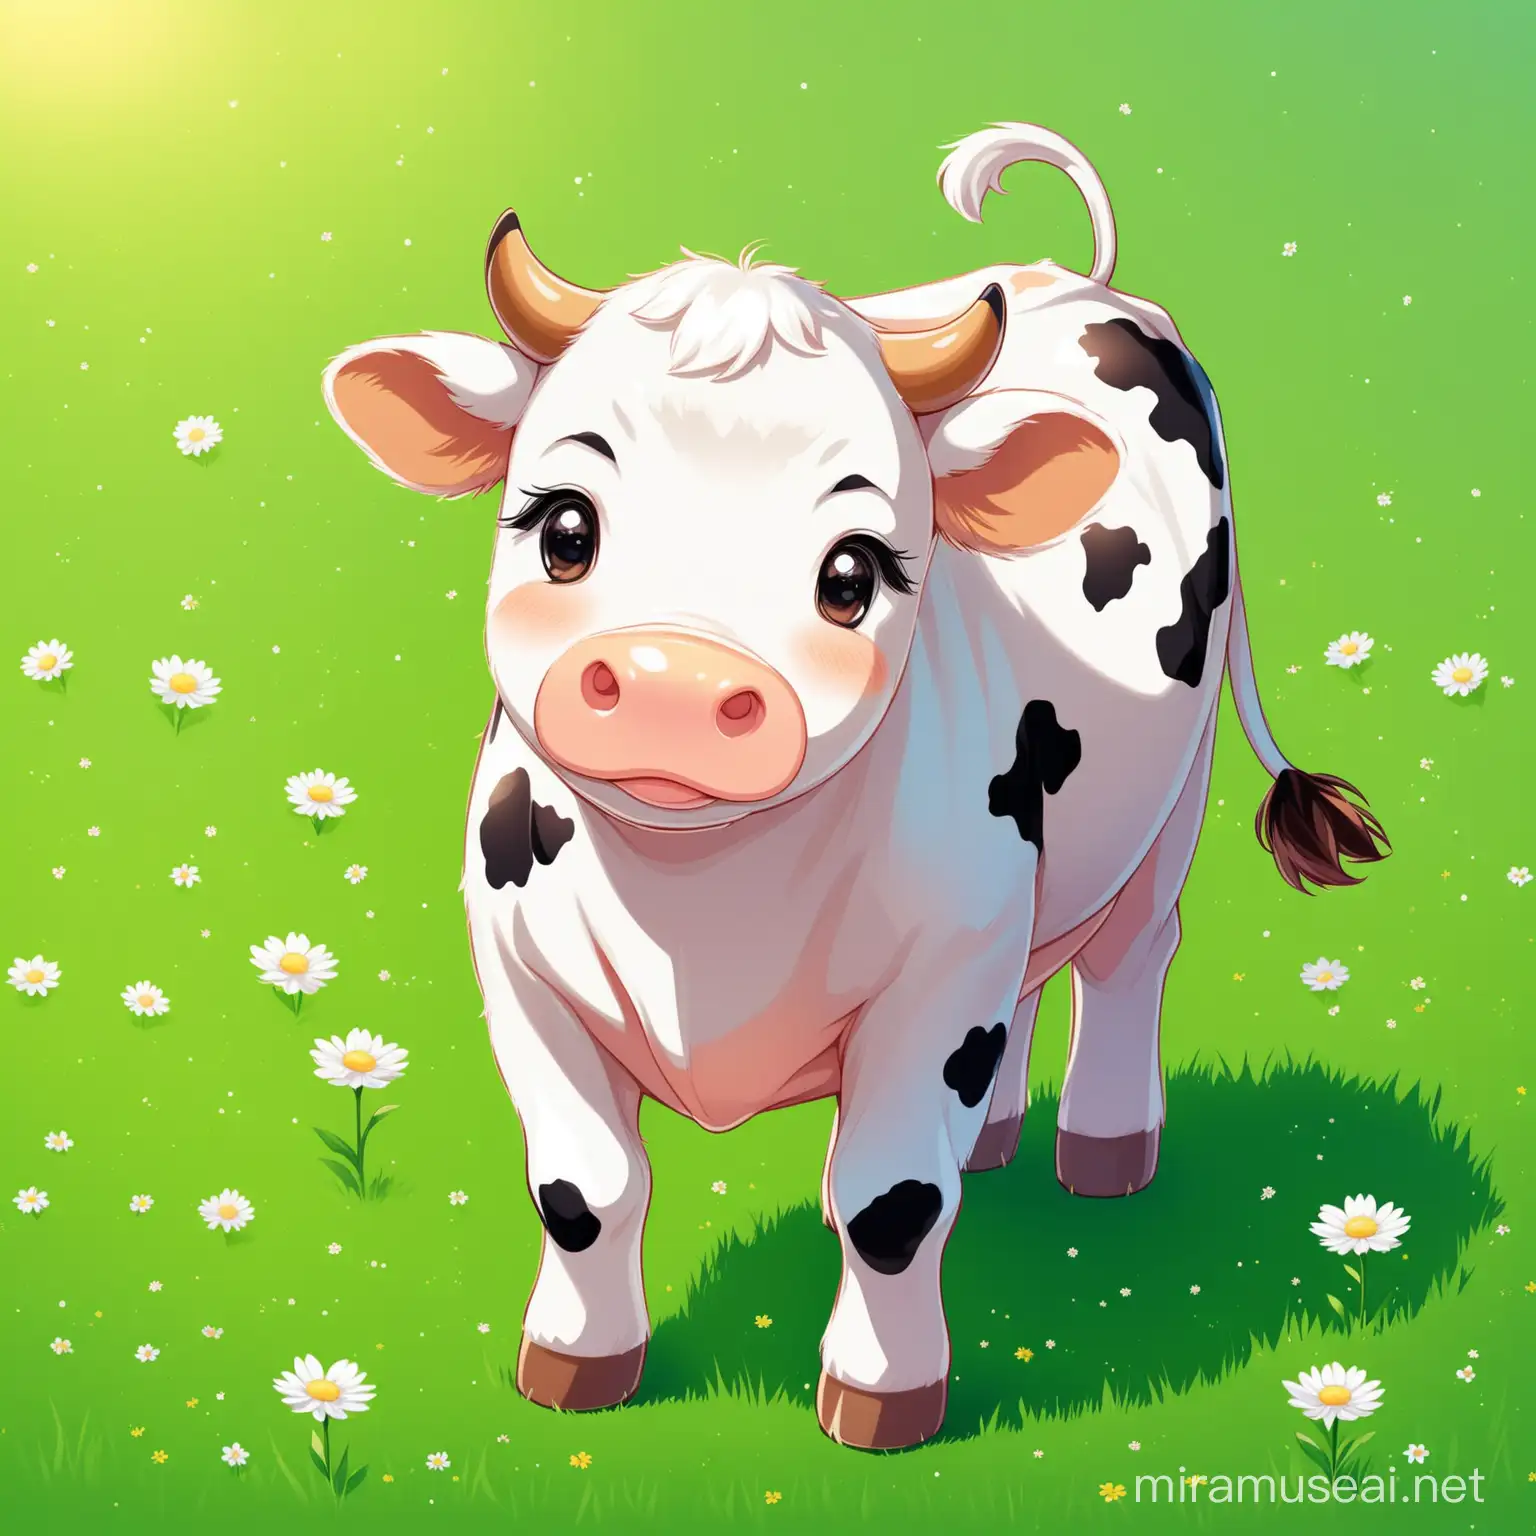 Adorable Cow Grazing on Vibrant Green Pasture